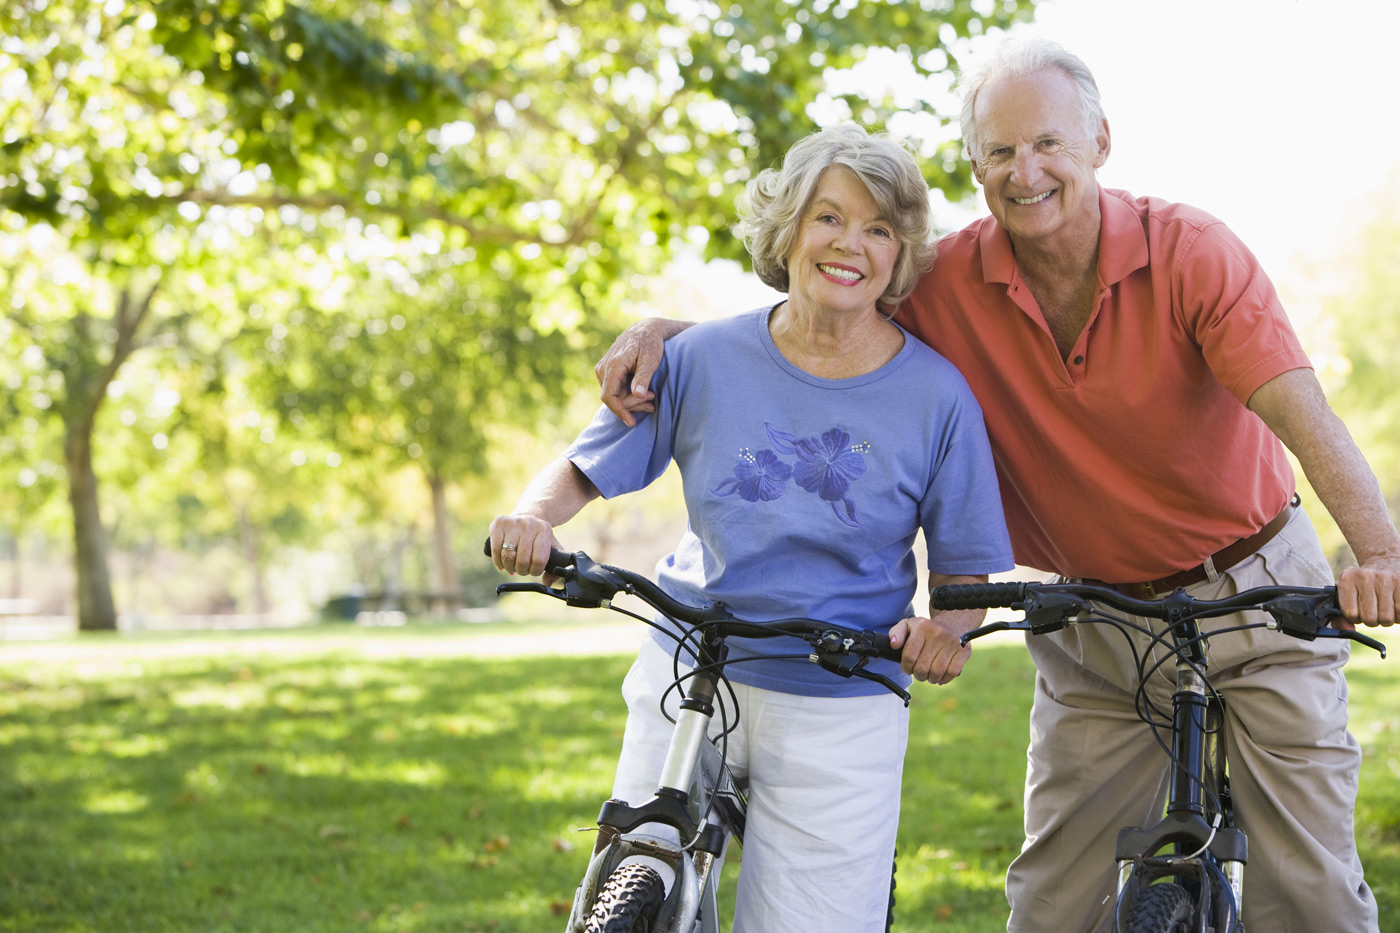 The elderly couple both riding bicycles, with the smiling man in the front wrapping his arm around the woman behind.